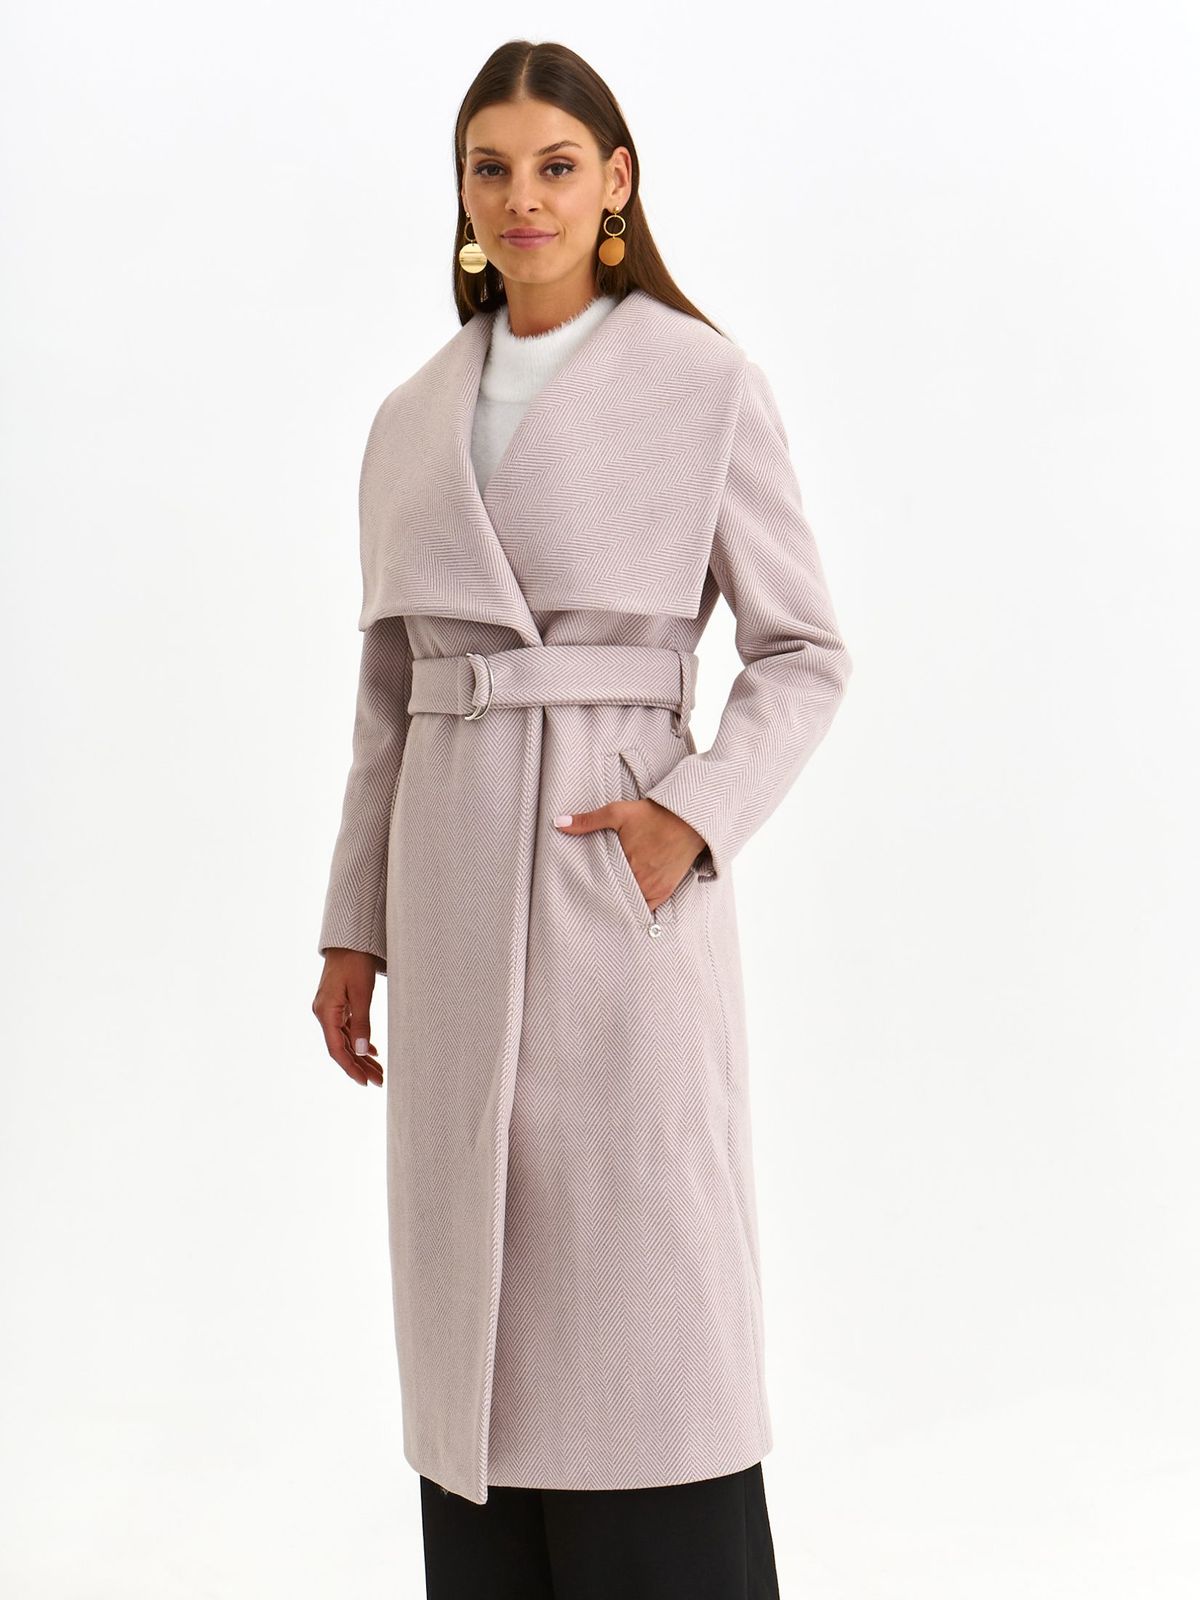 Lightpink coat elastic cloth long straight accessorized with tied waistband lateral pockets